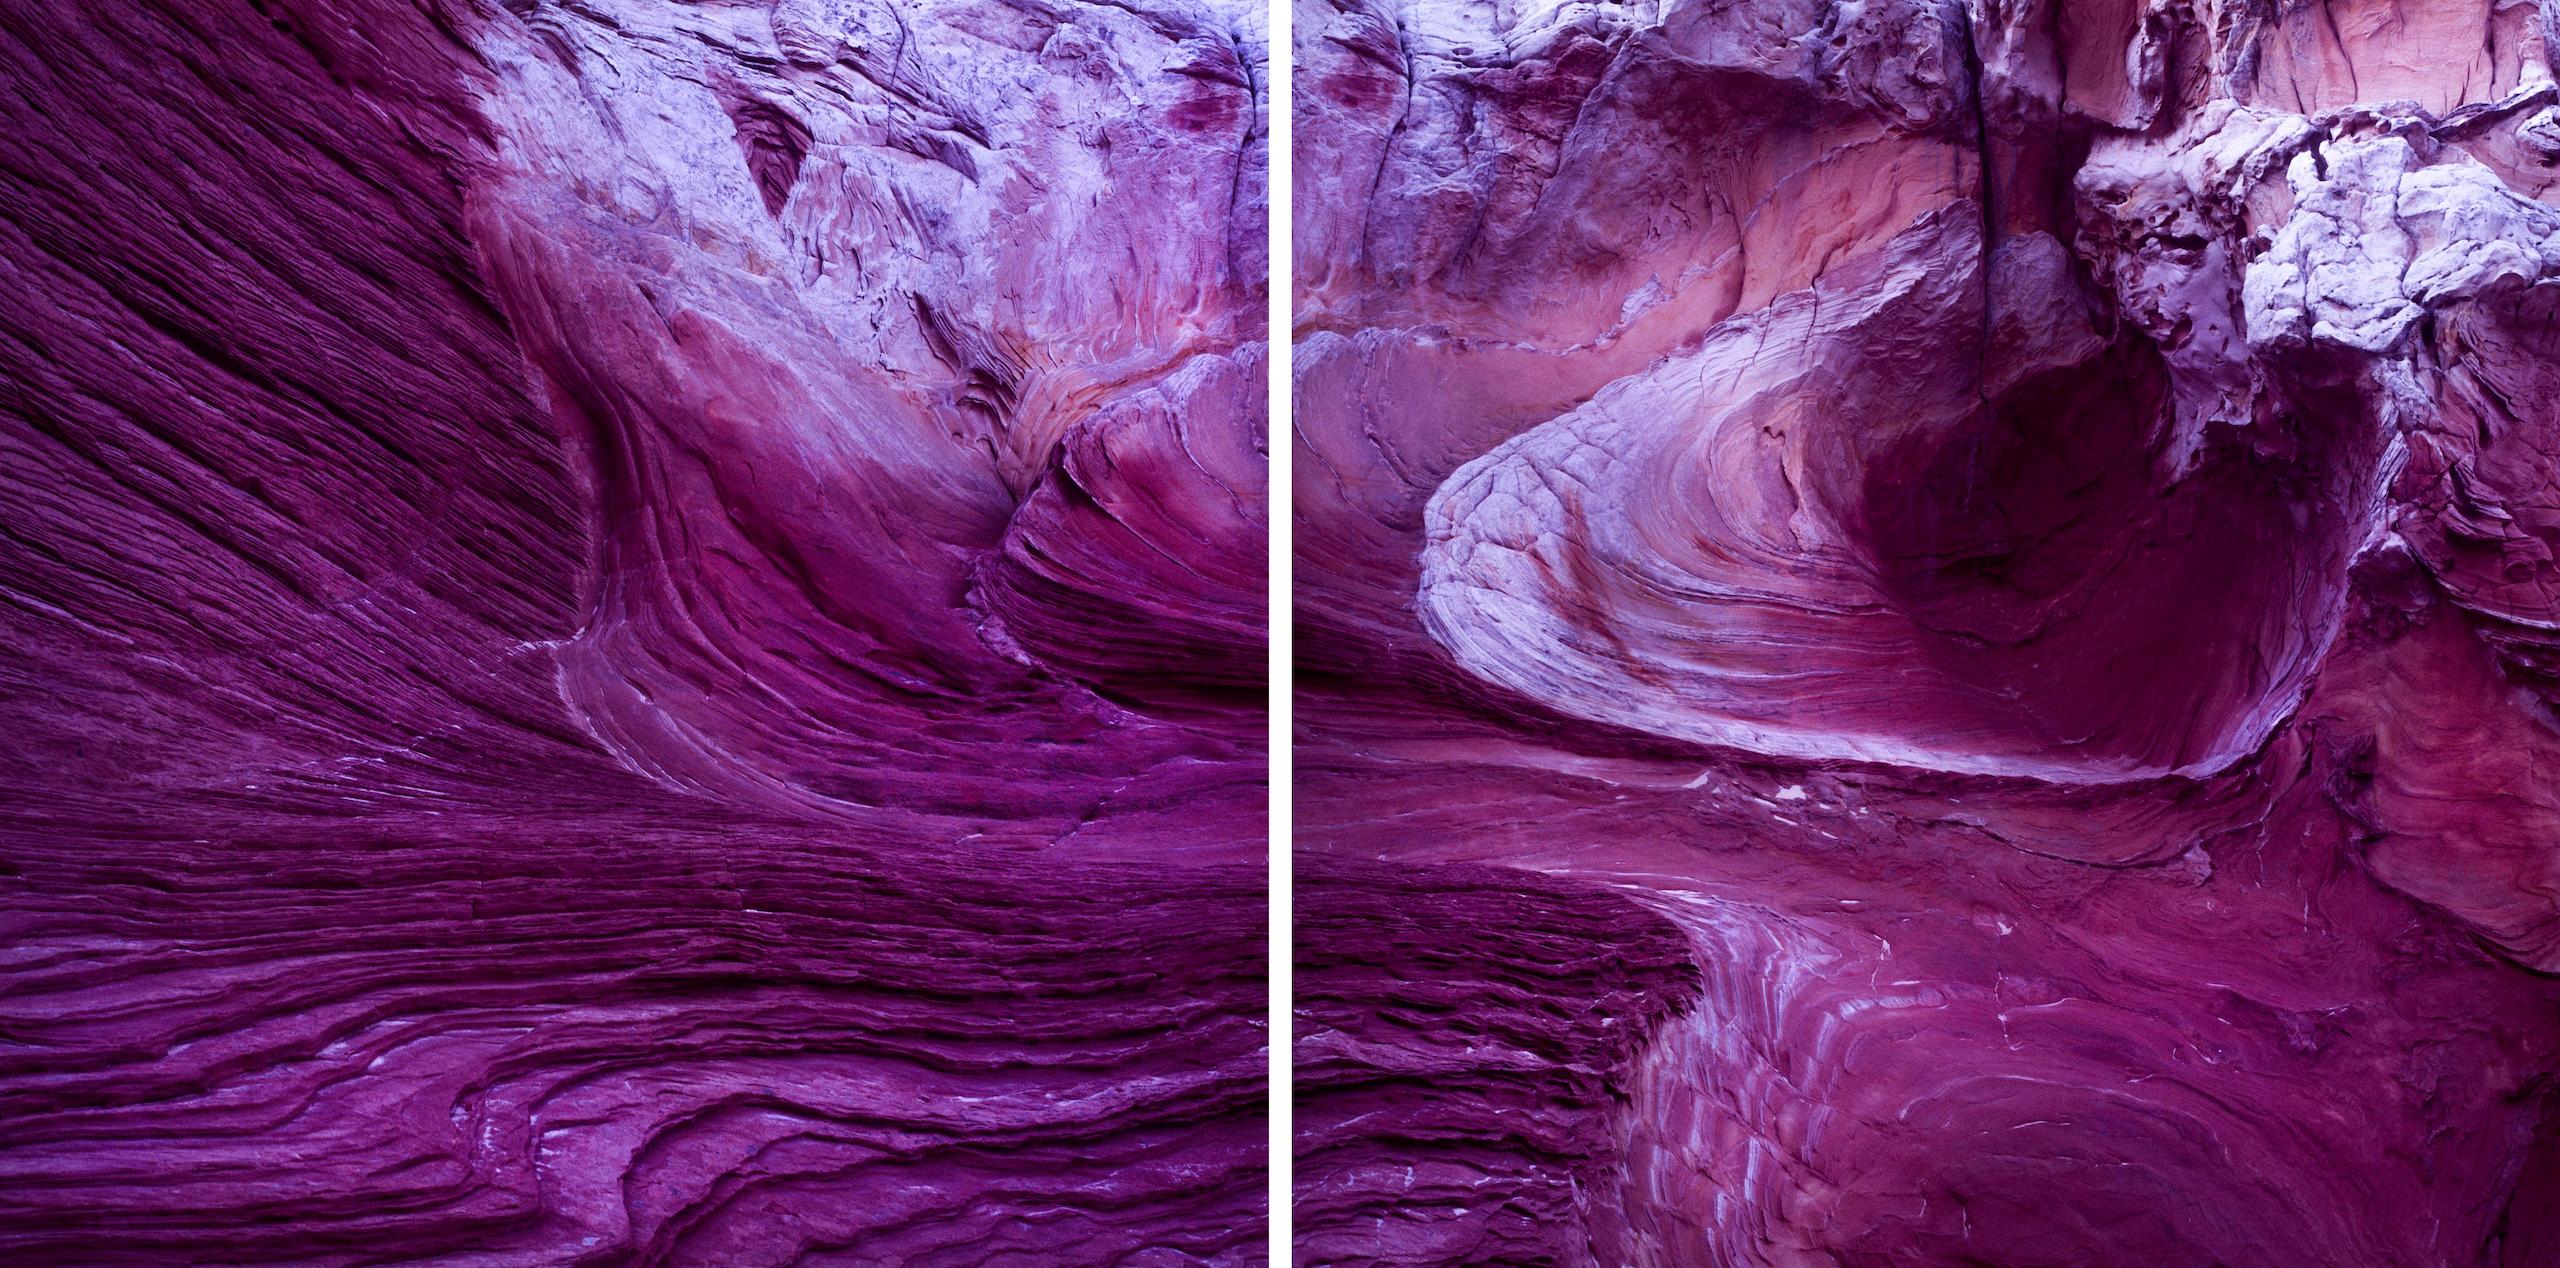 Strata IX is a limited-edition diptych photograph by contemporary artist Luca Marziale. 

This photograph is sold unframed as a print only. It is available in 2 sizes:
*76.2 cm × 152.4 cm (30" × 60"), edition of 10 copies
*114.3 cm × 228.6 cm (45" ×